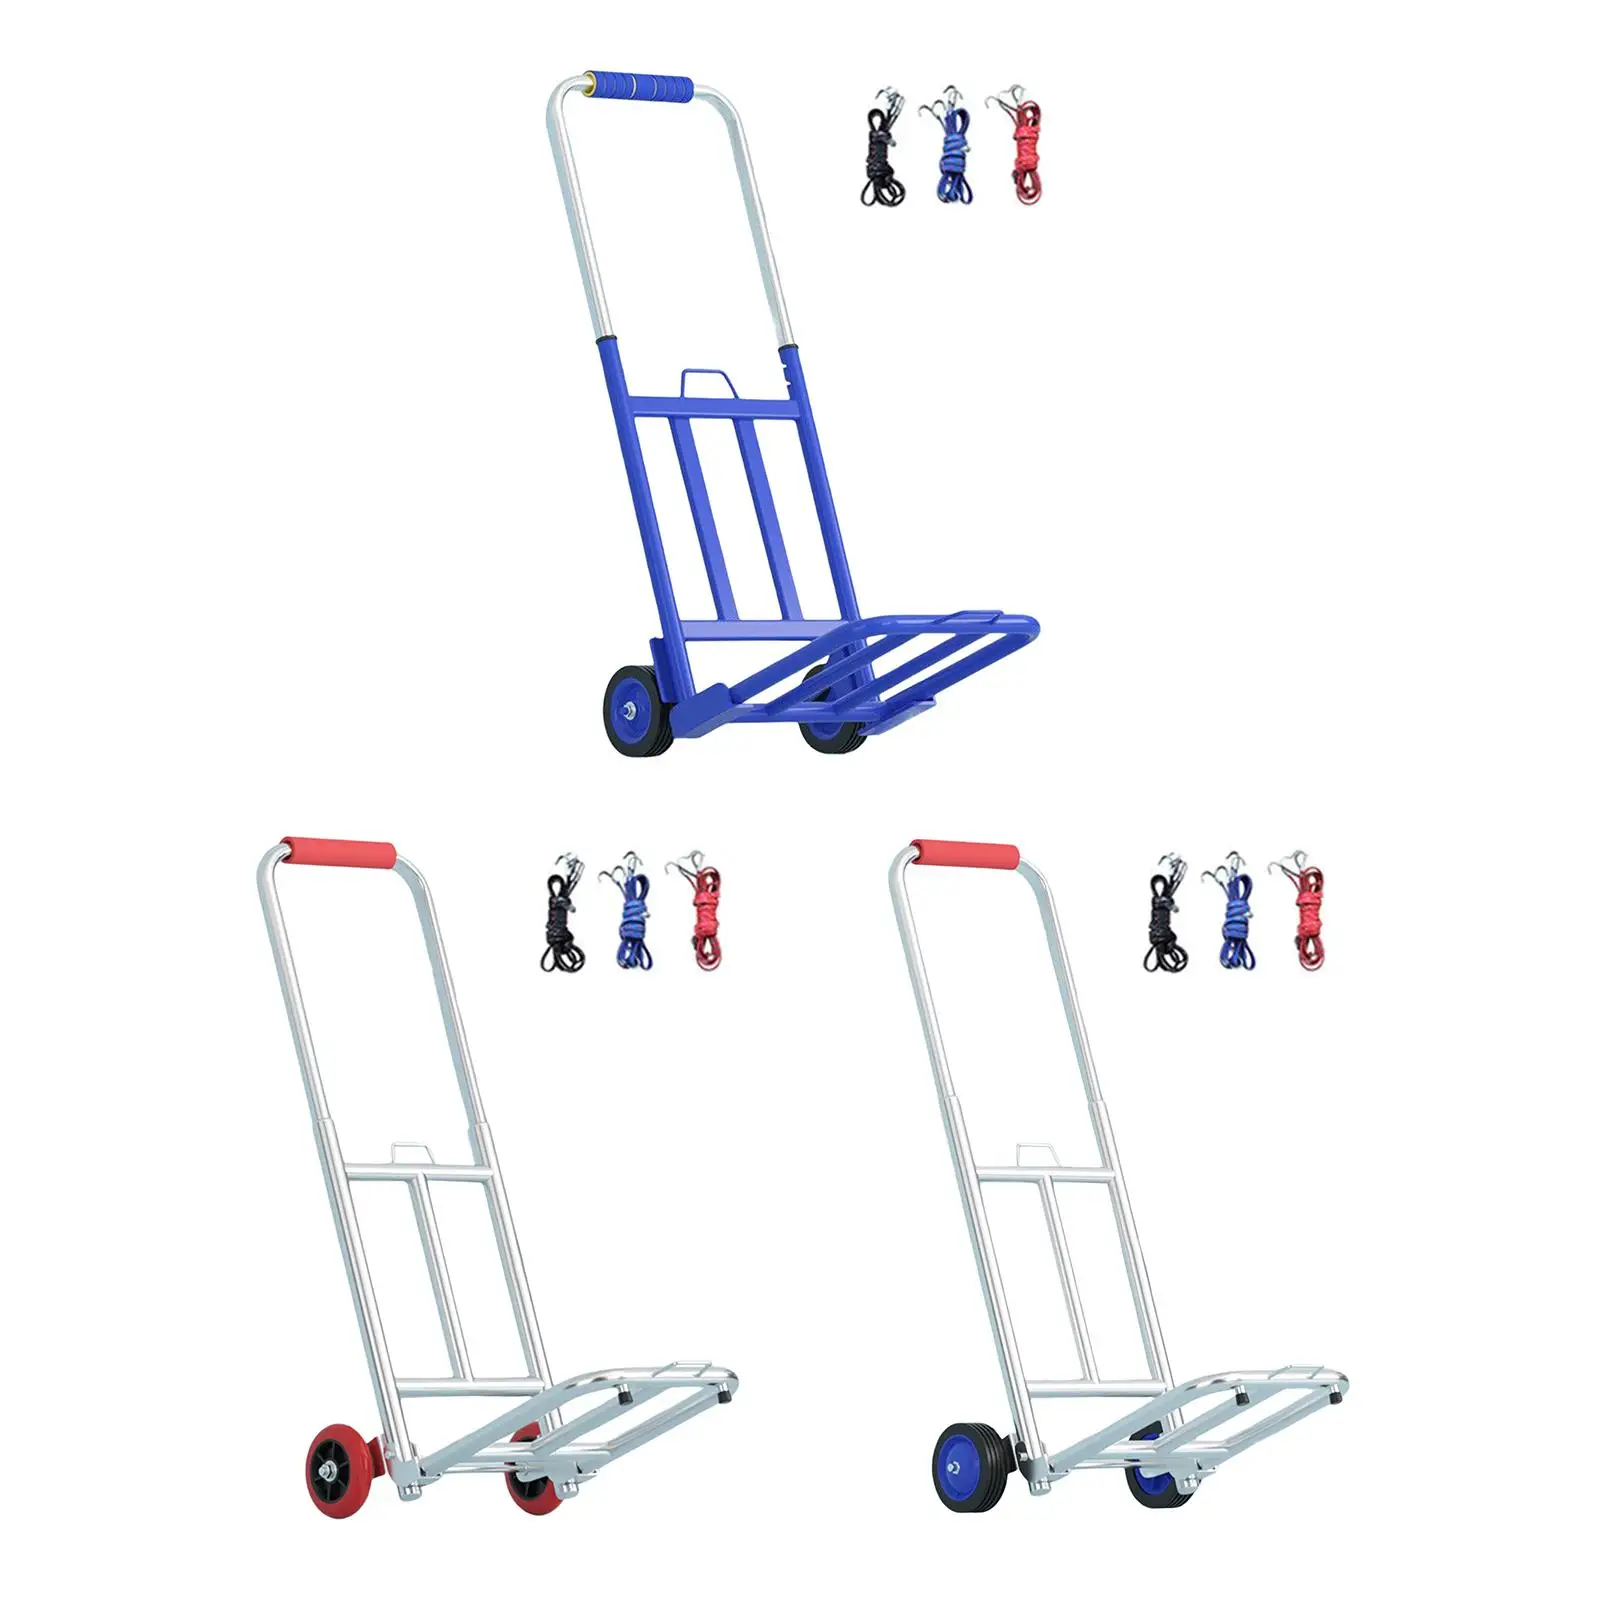 Luggage Trolley Cart Compact Adjustable Foldable Platform Truck Collapsible Foldable Hand Cart for Transportation Travel